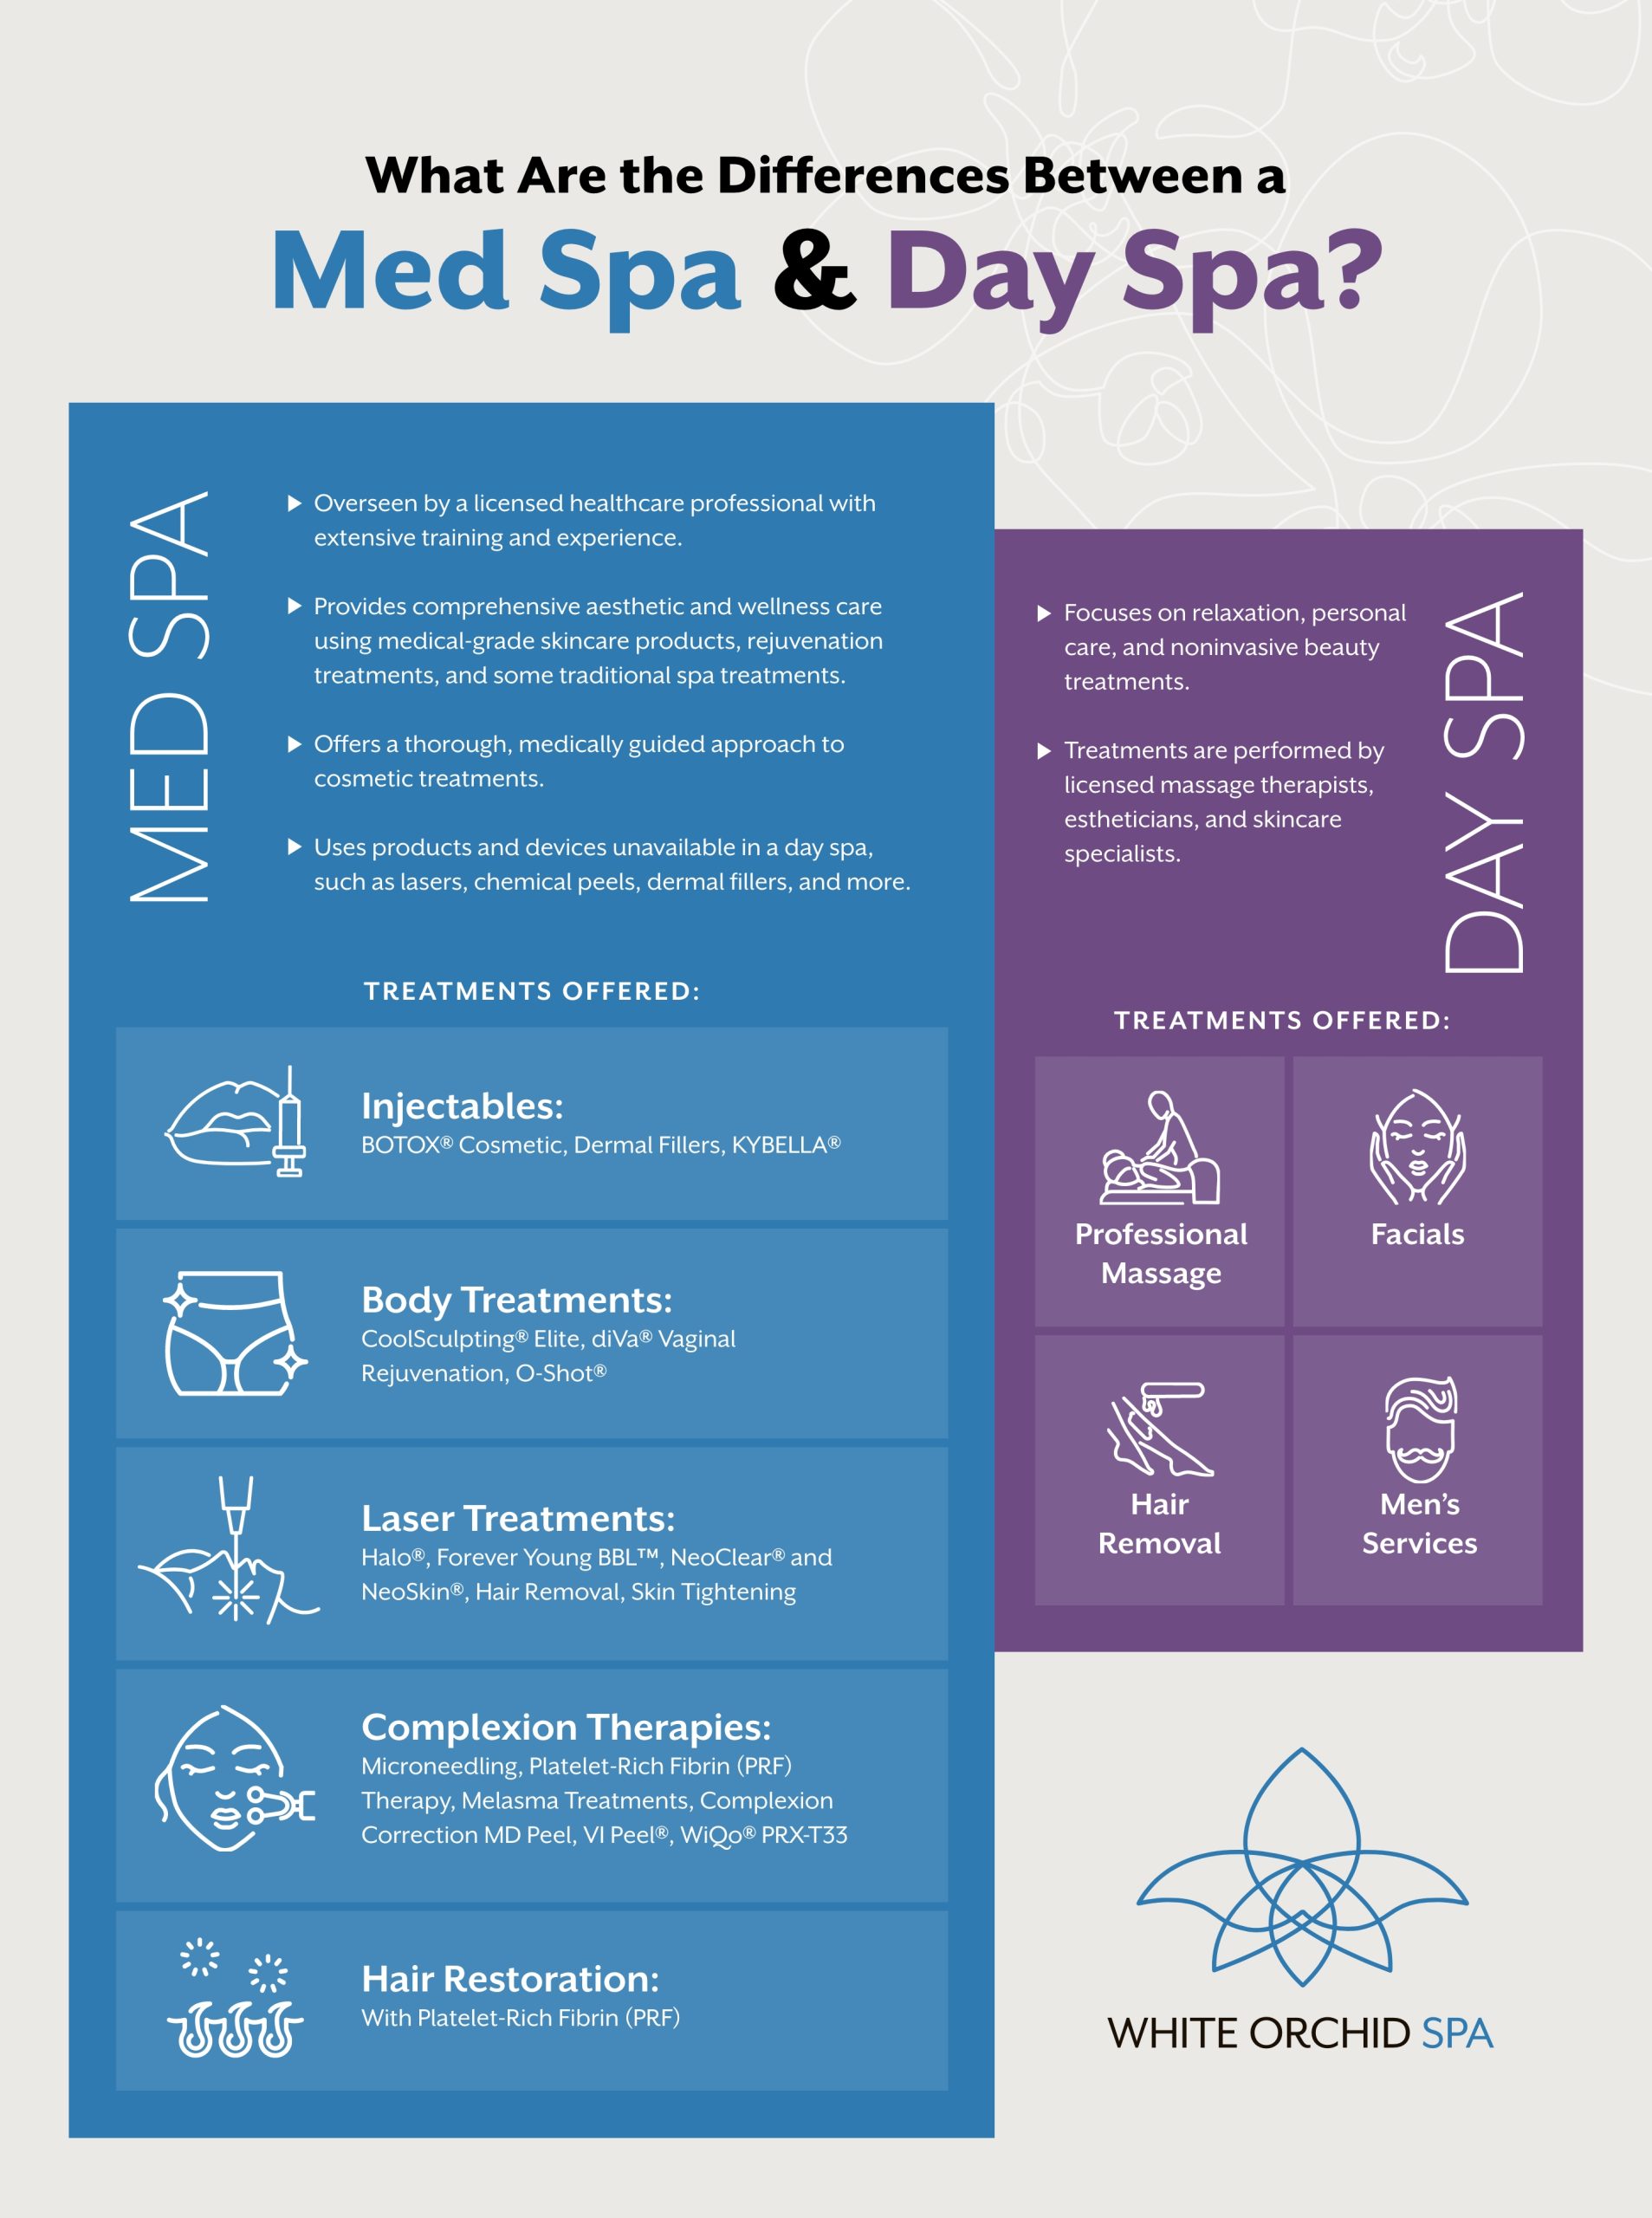 This infographic illustrates what differentiates and medical spa from a day spa